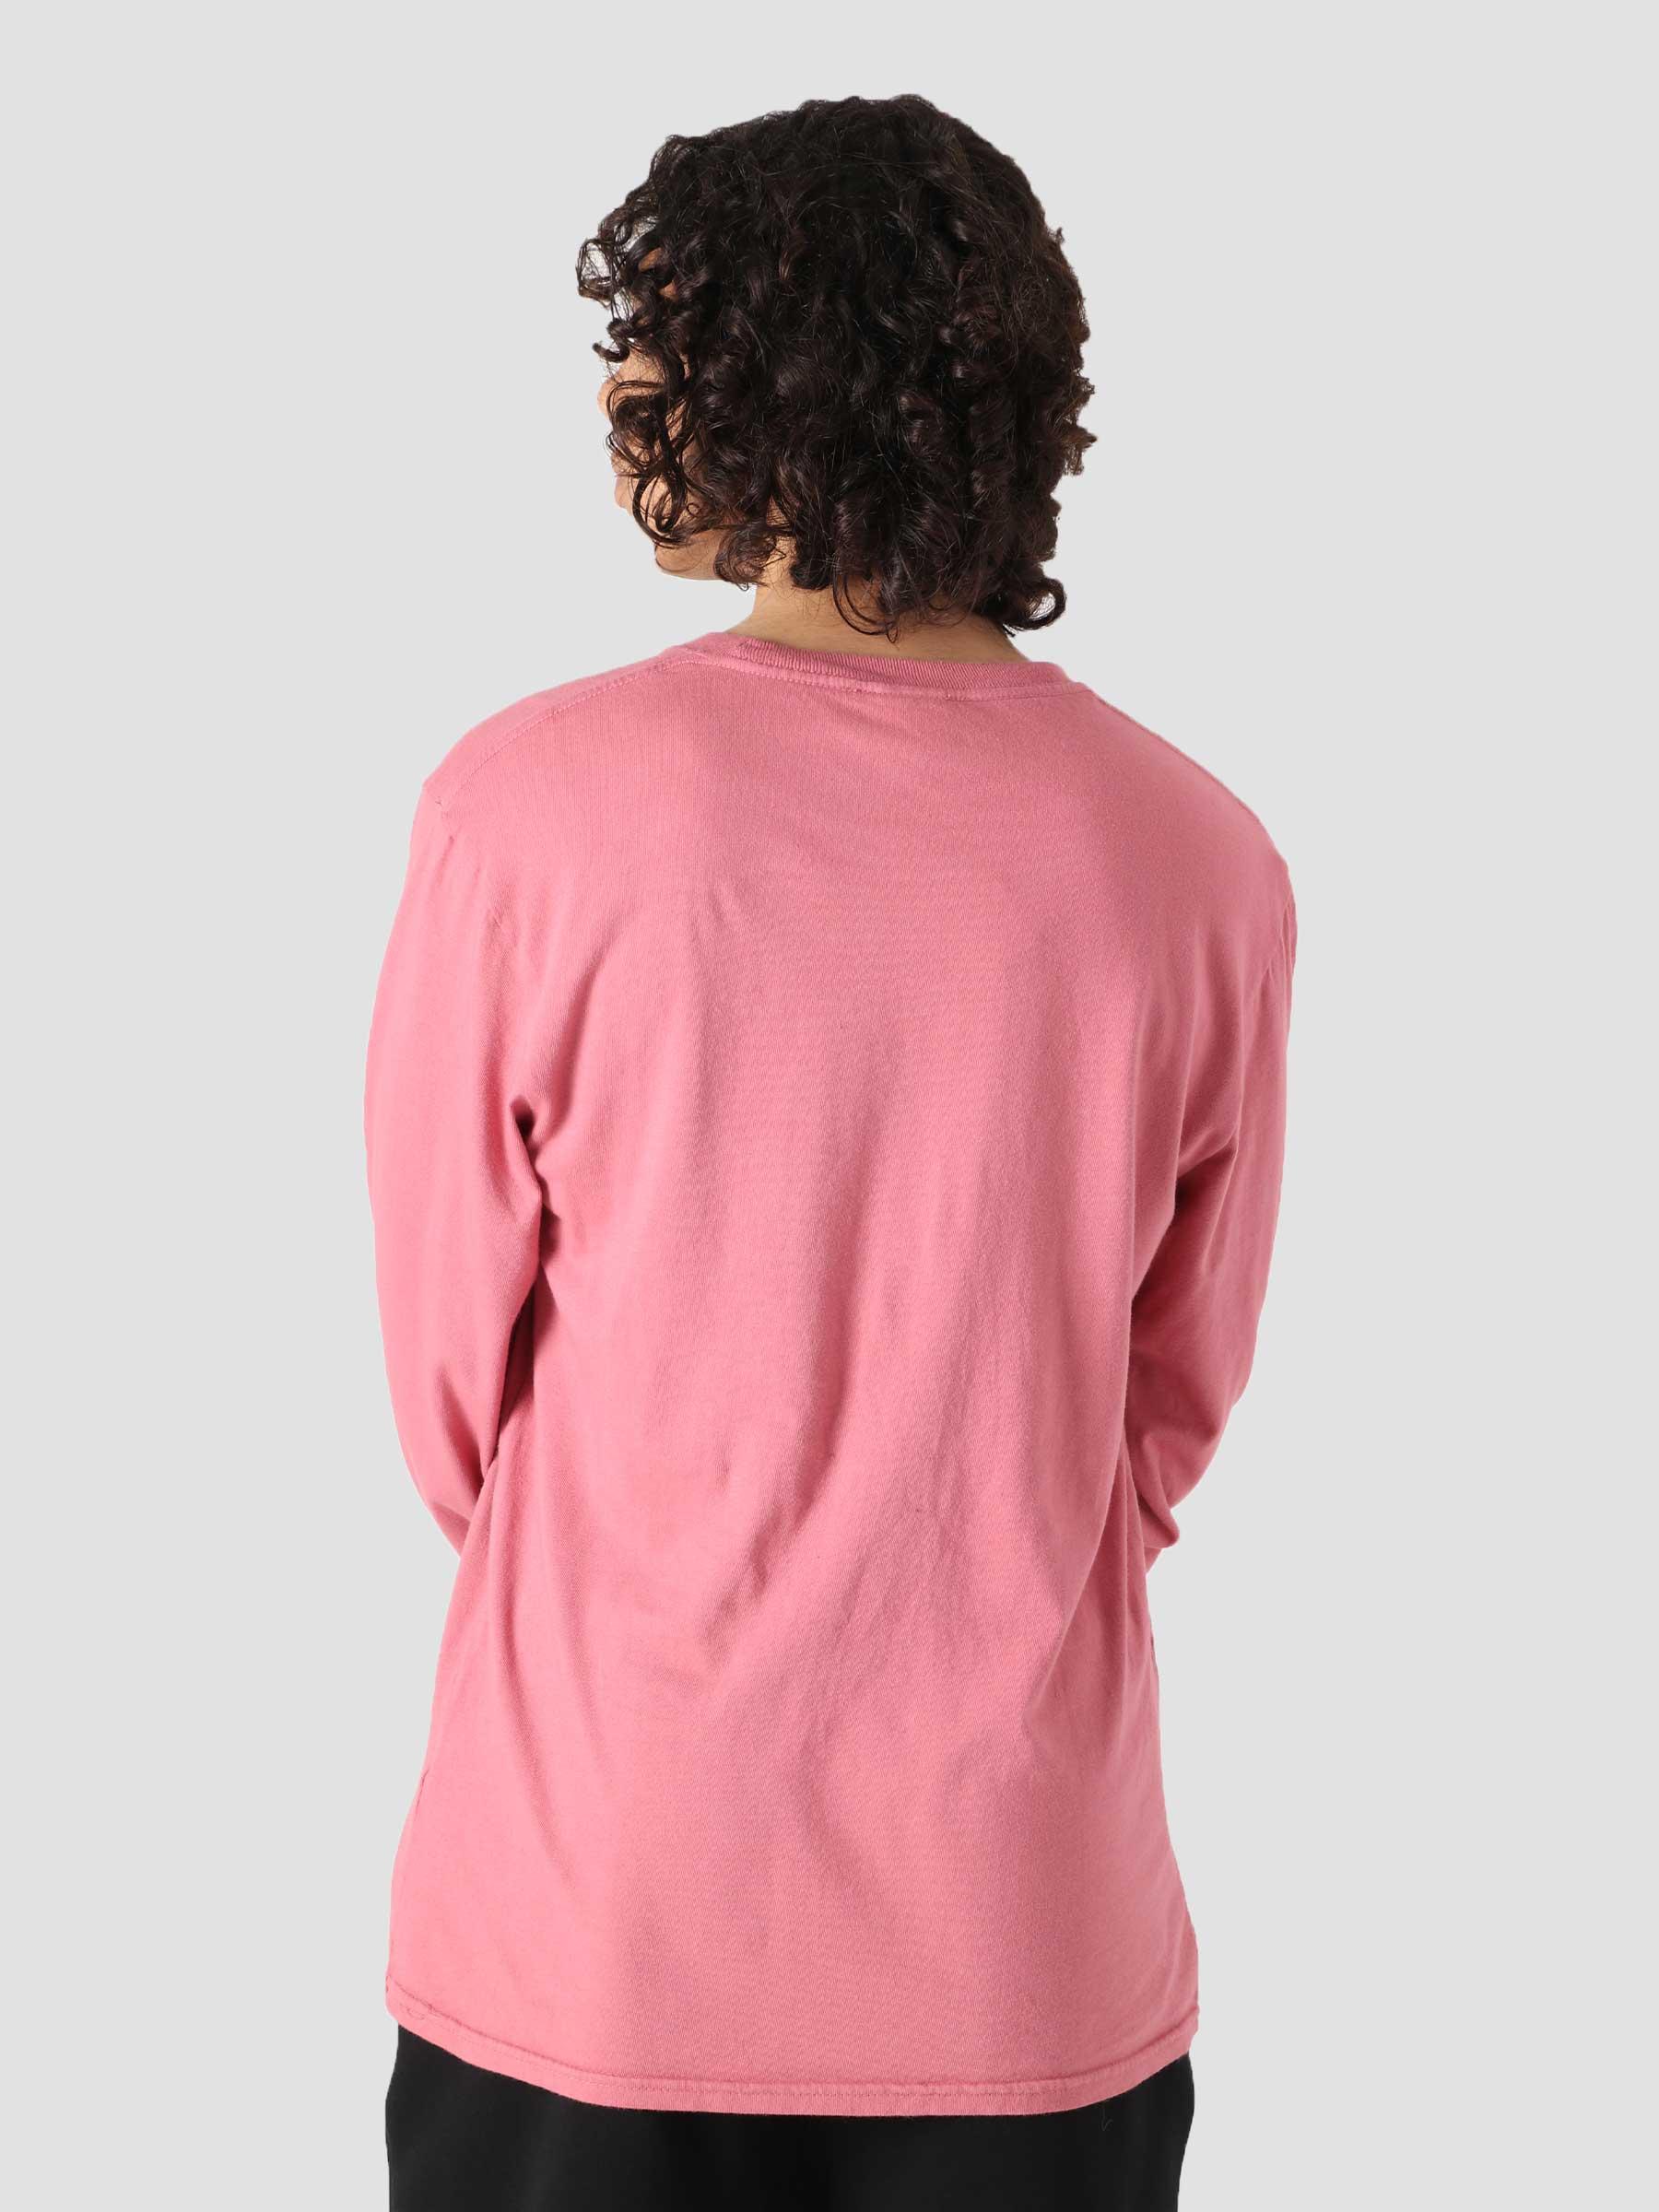 Voodoo Washed L/S Tee Dusty Rose TS01761